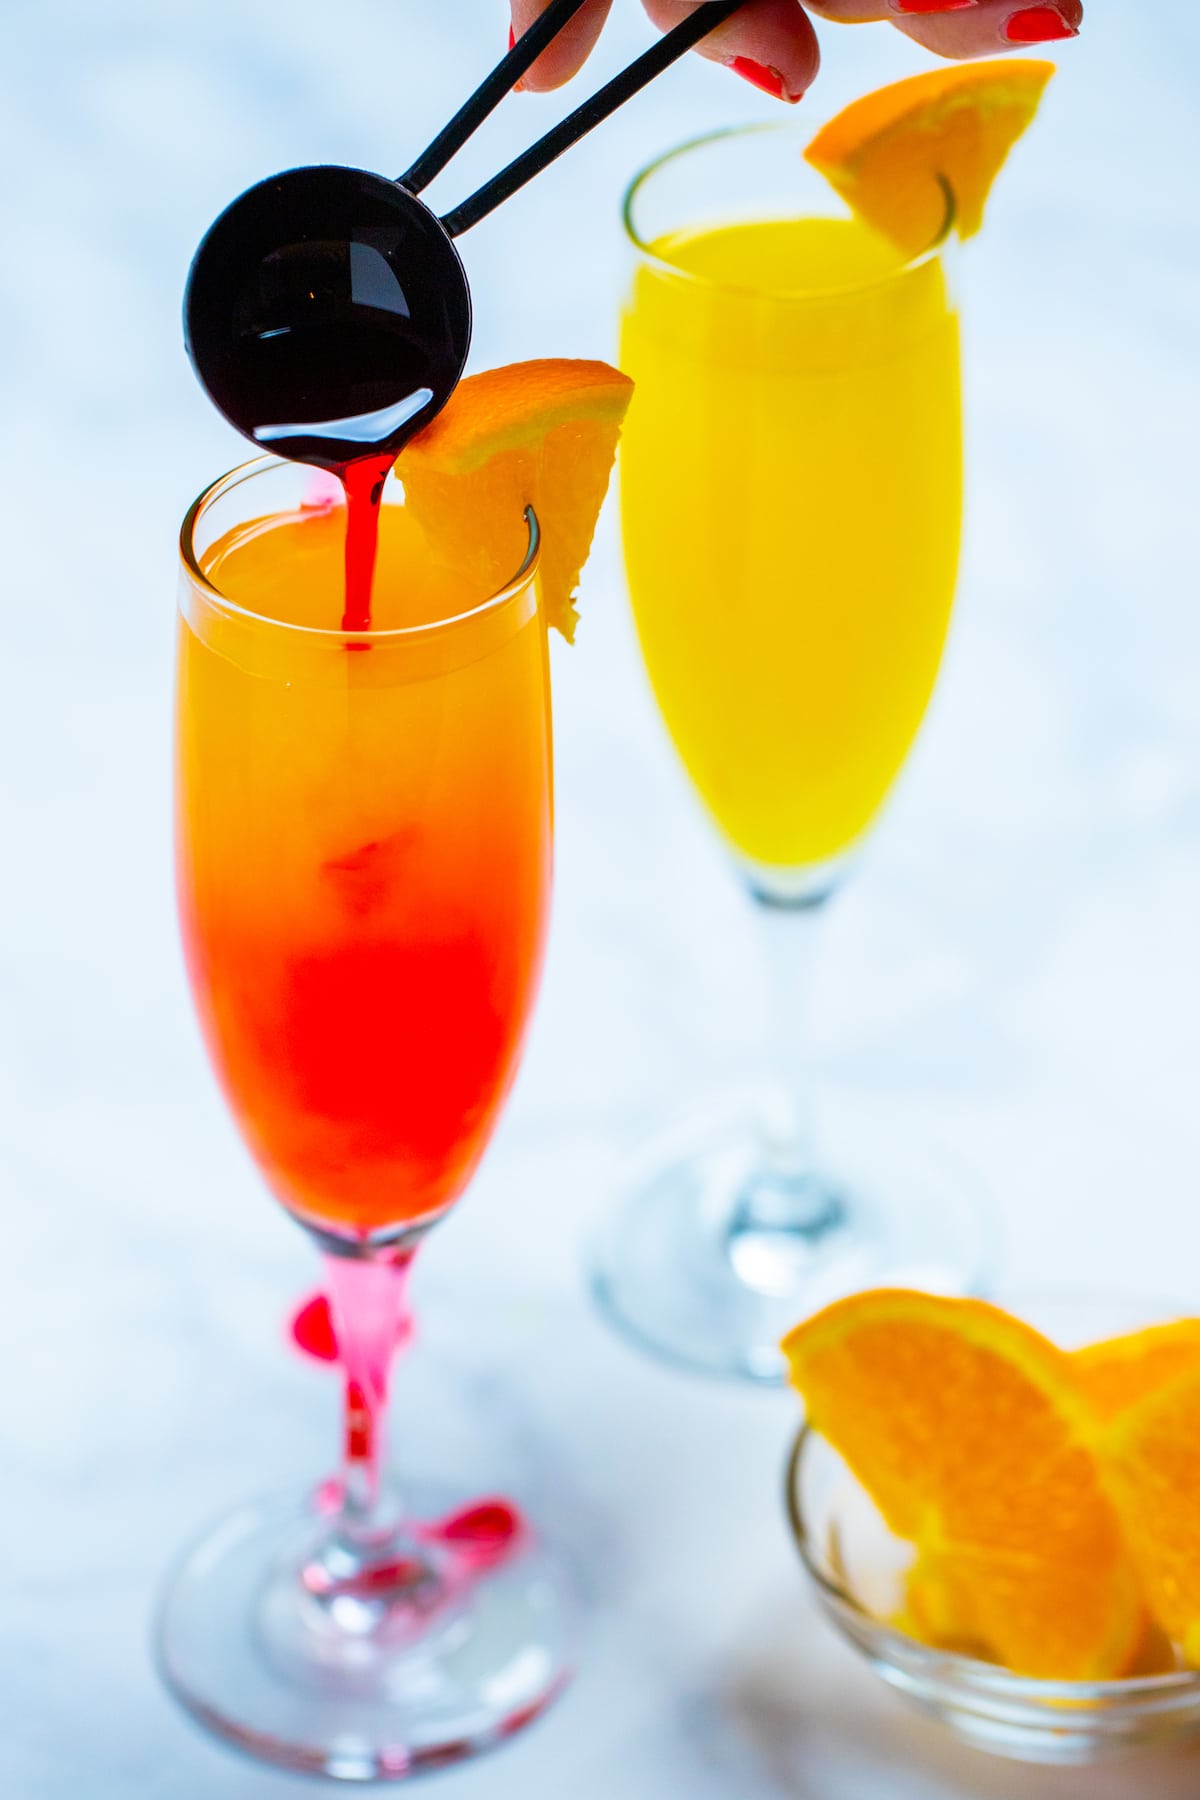 Two wine flutes with prosecco mimosas garnished with orange slices, and a tablespoon pouring grenadine into one of the glasses, with a small glass bowl of oranges on the table next to them.